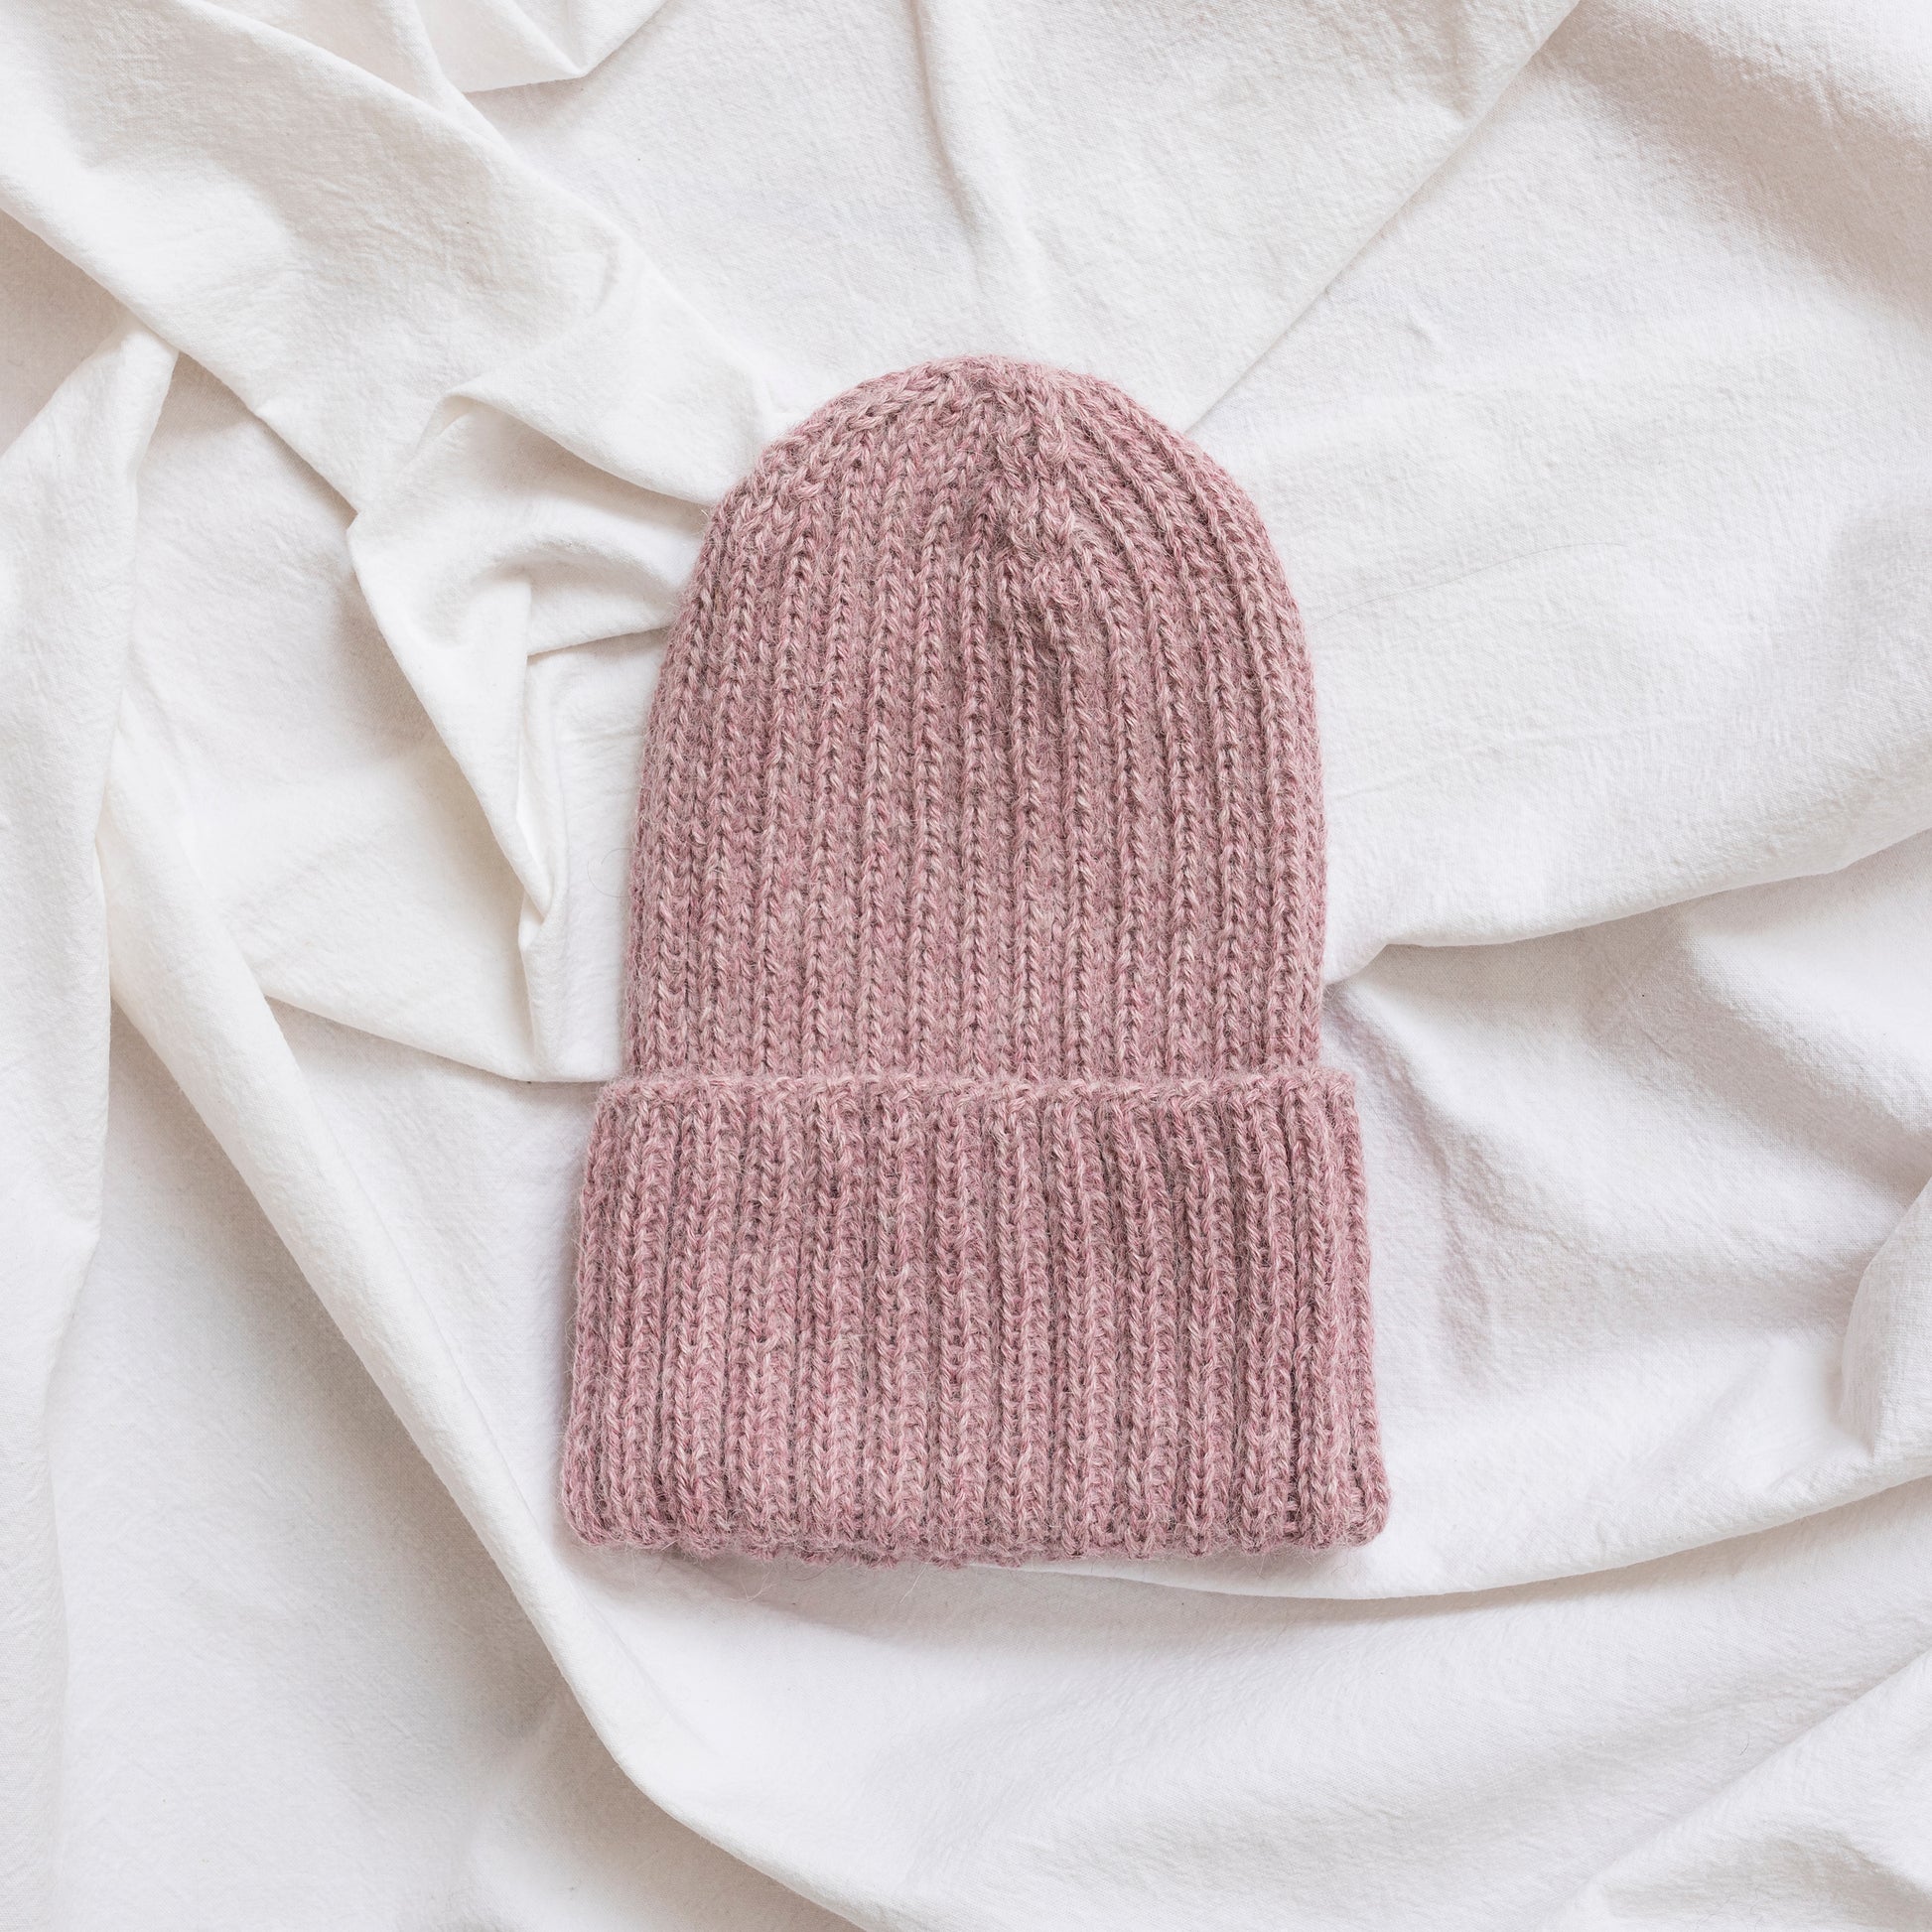 Rose pink coloured soft beanie with rib detail made from alpaca wool.